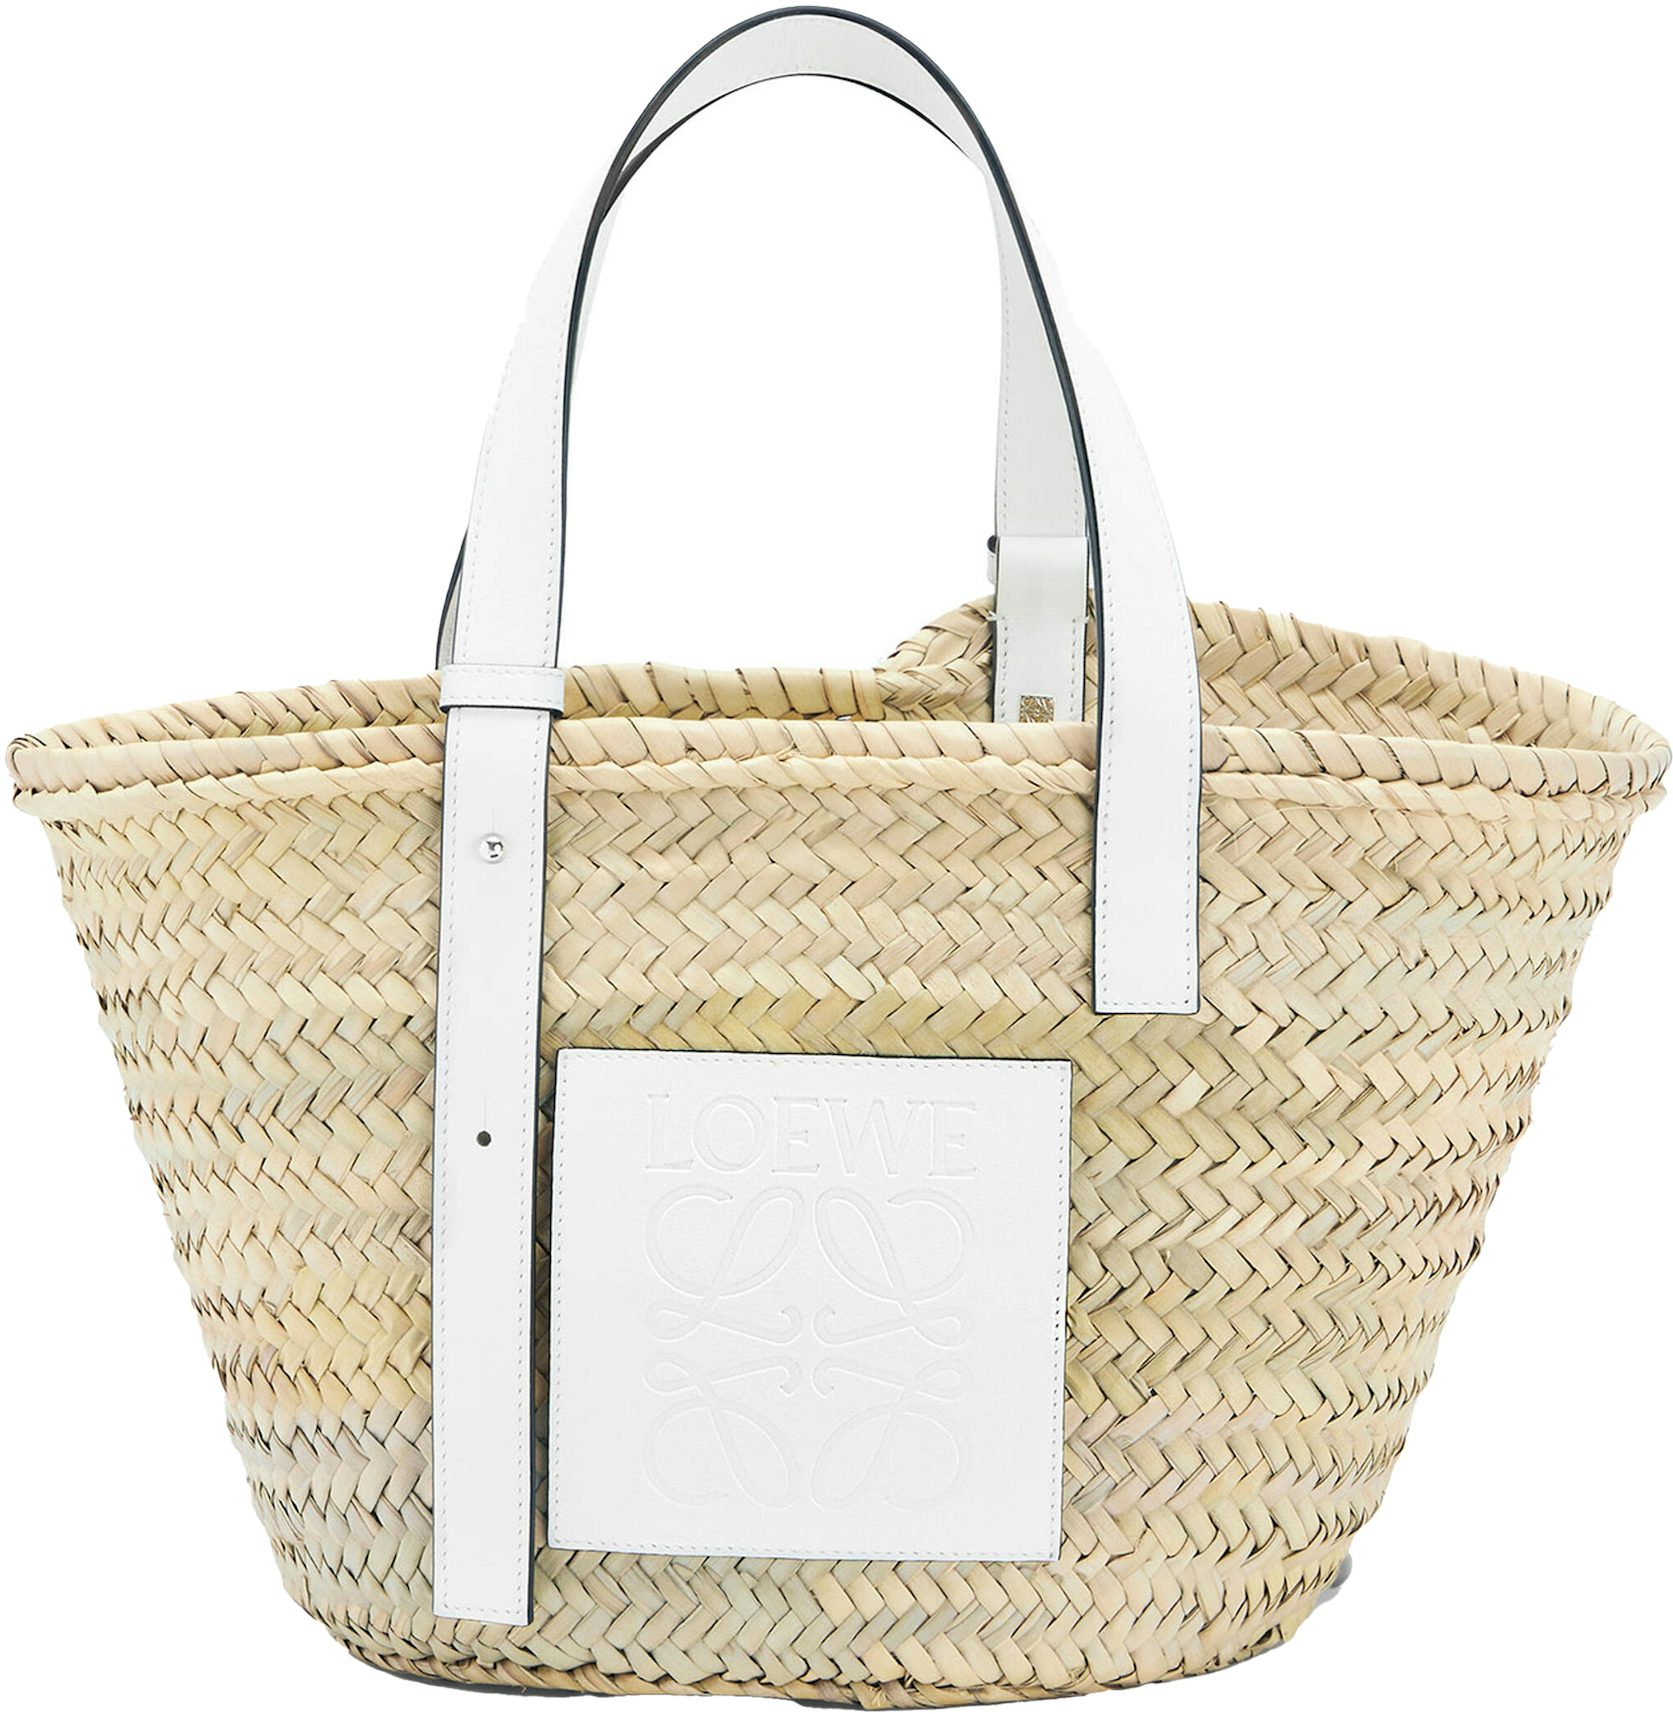 LOEWE Basket Bag in Palm Leaf and Calfskin Natural/White in Calfskin  Leather - US